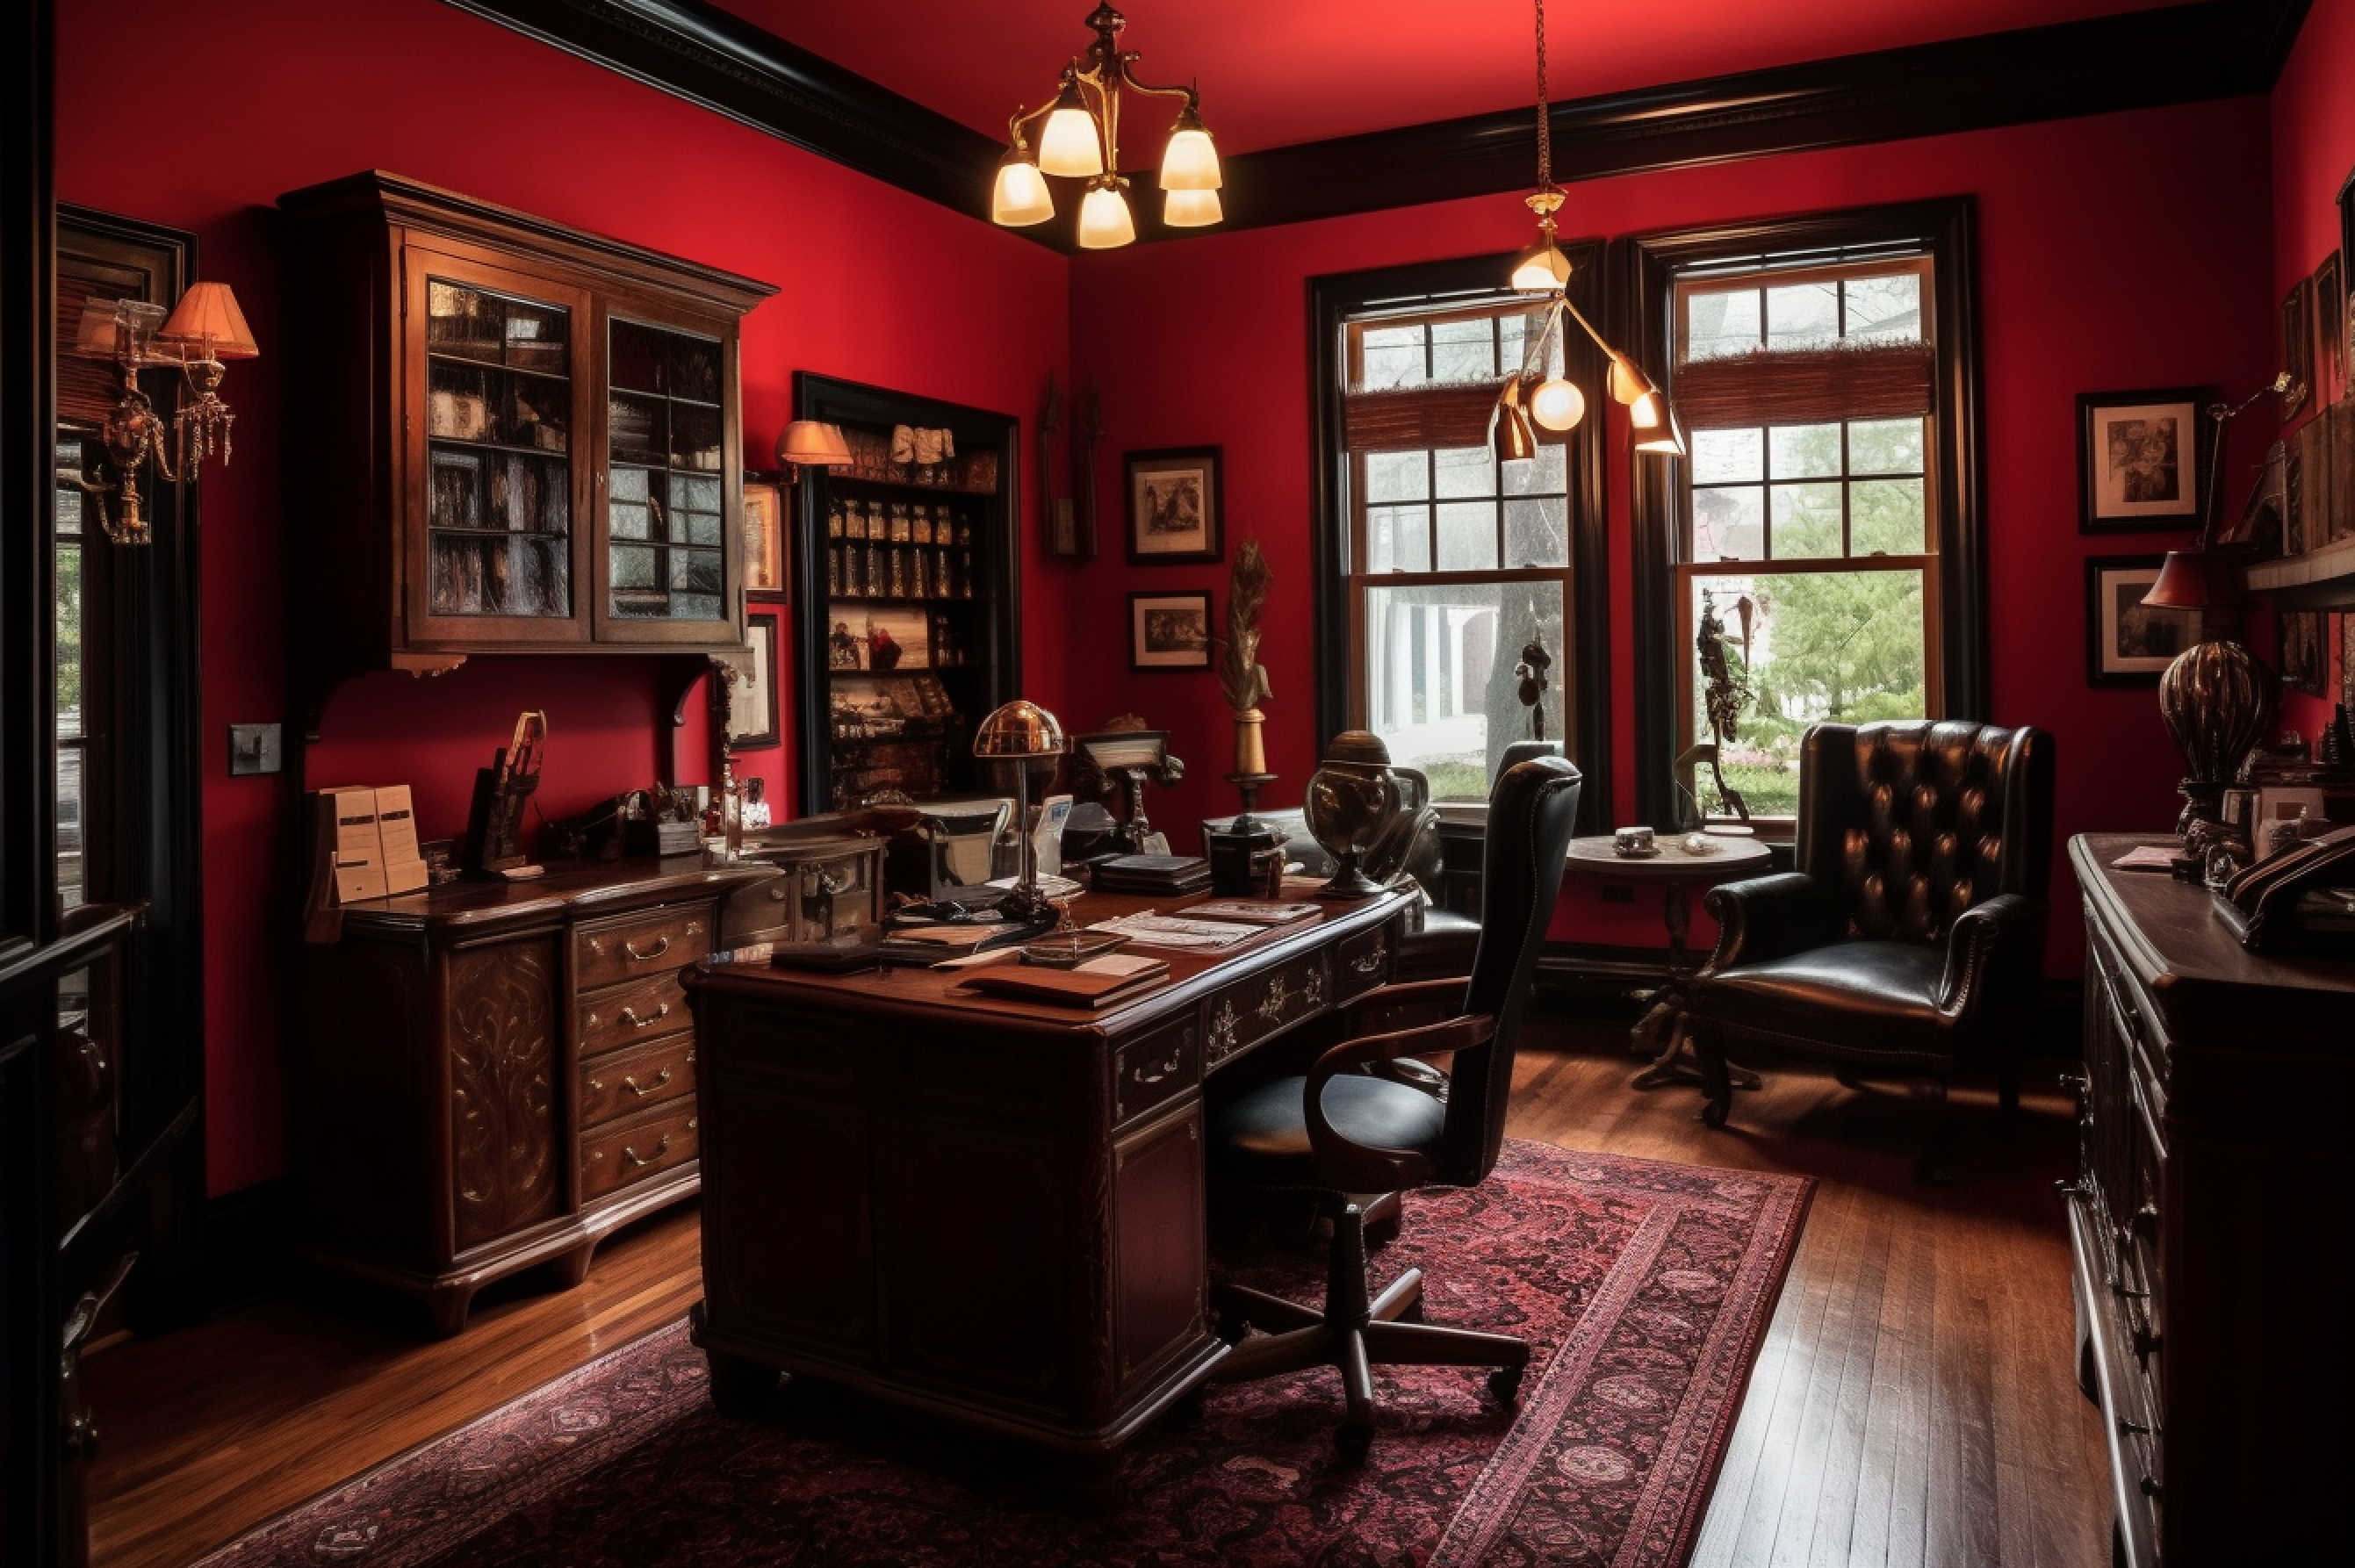 Photo of a home office with a mahogany desk and bookshelves against vibrant scarlet red walls.